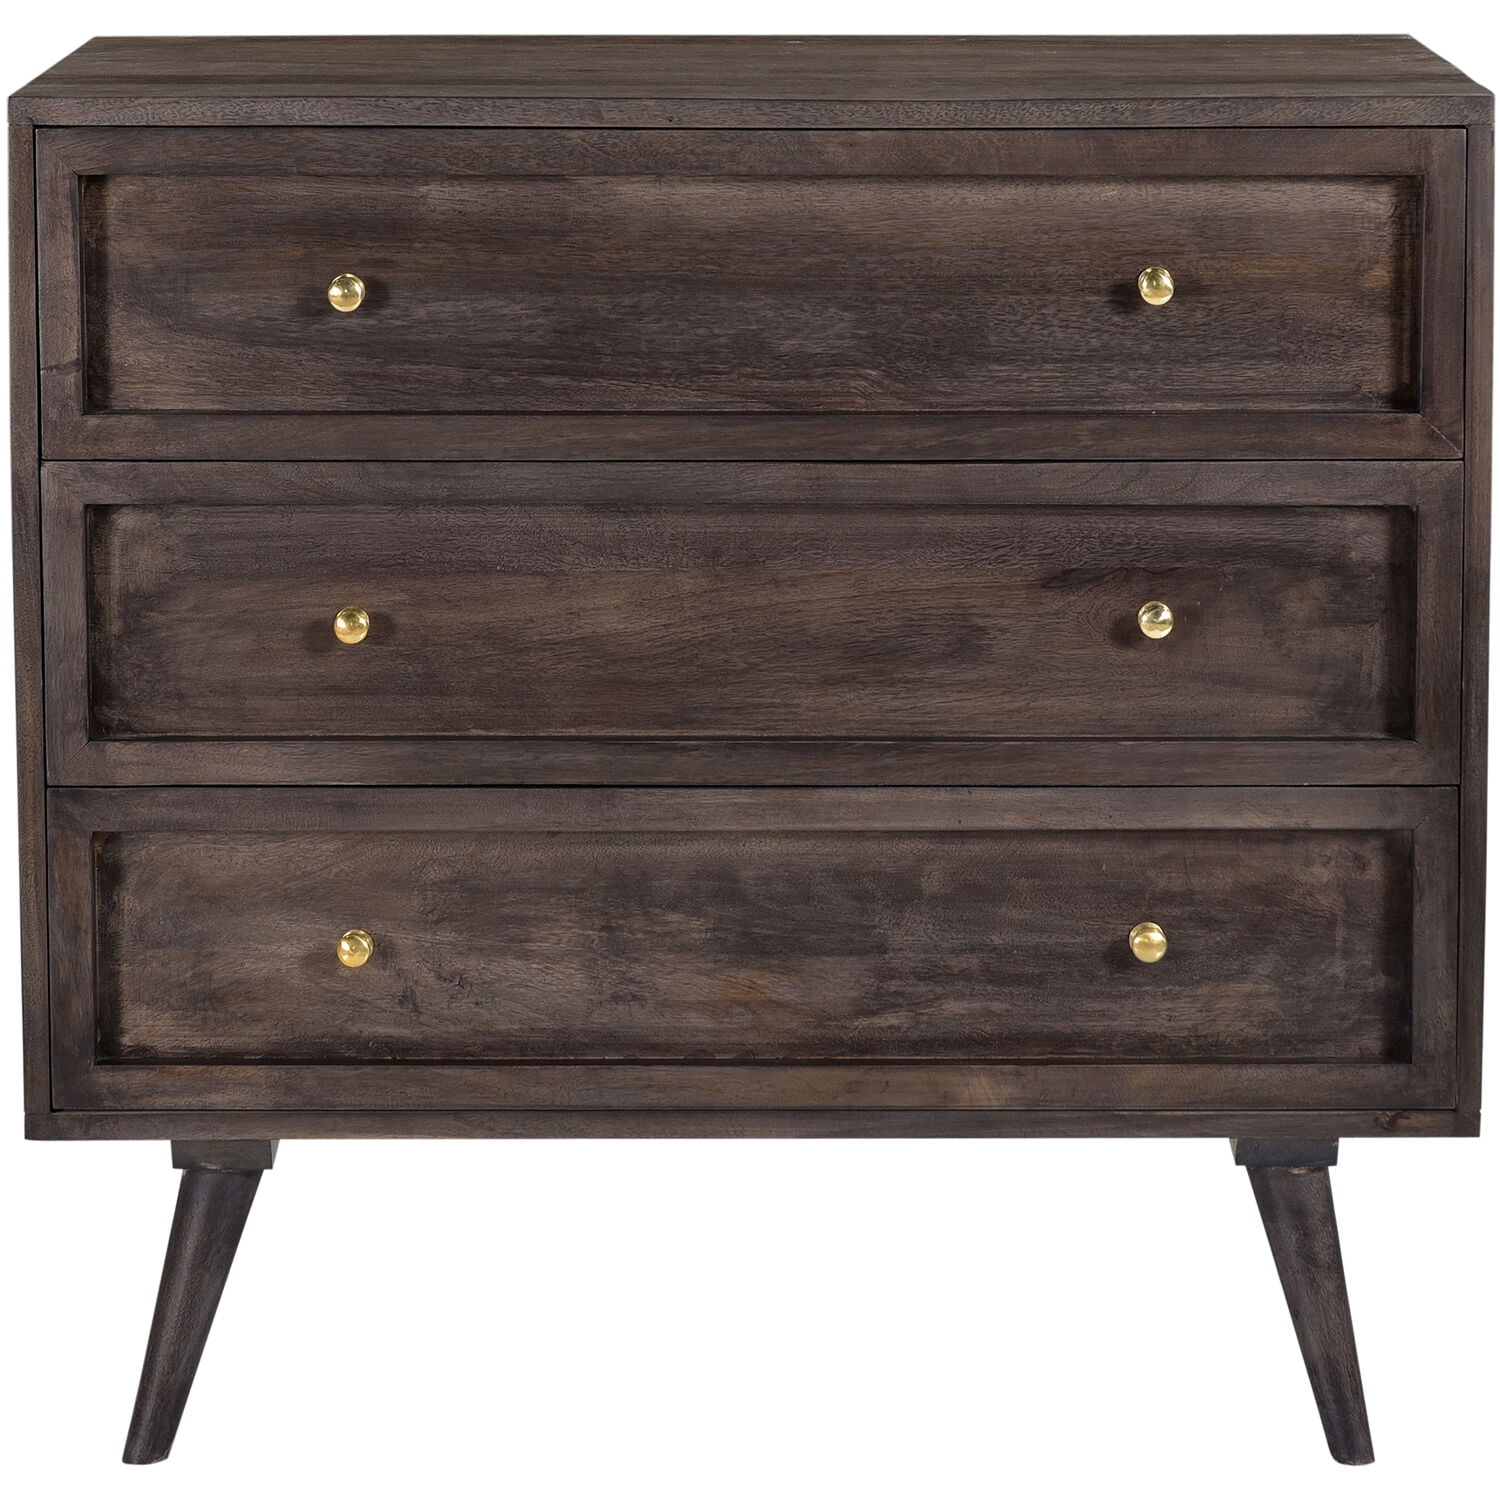 Cmf 988009-gry Parkview Mango Wood 3-drw Chest Wood Front Drawers